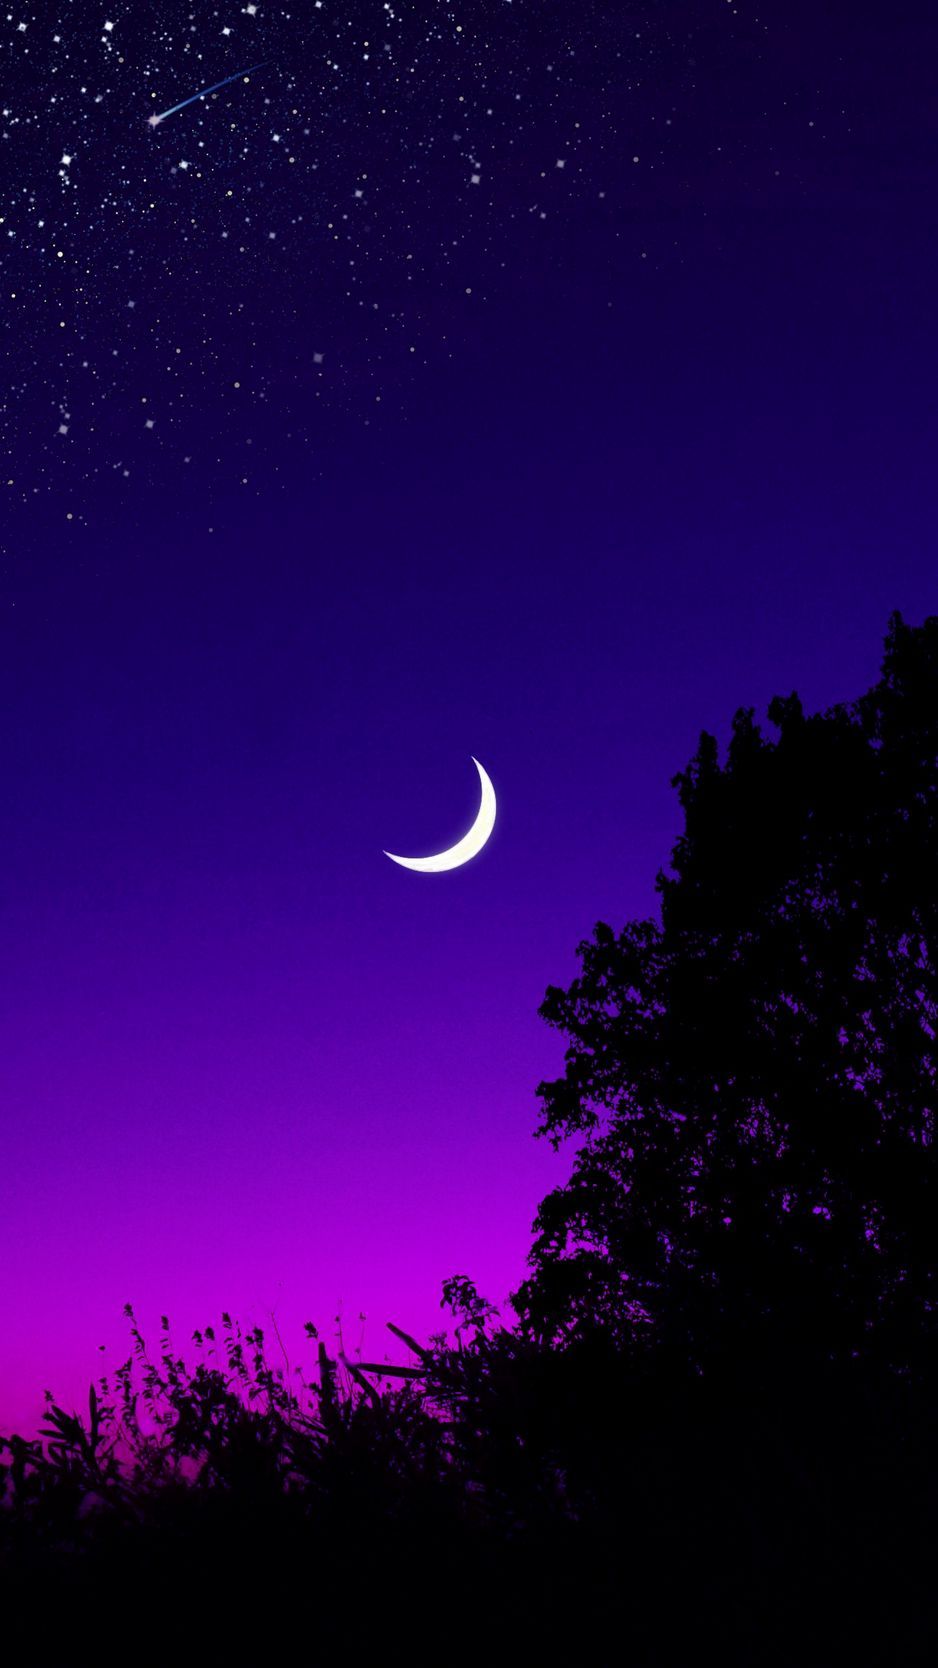 IPhone wallpaper of a crescent moon and stars in a purple sky - Moon